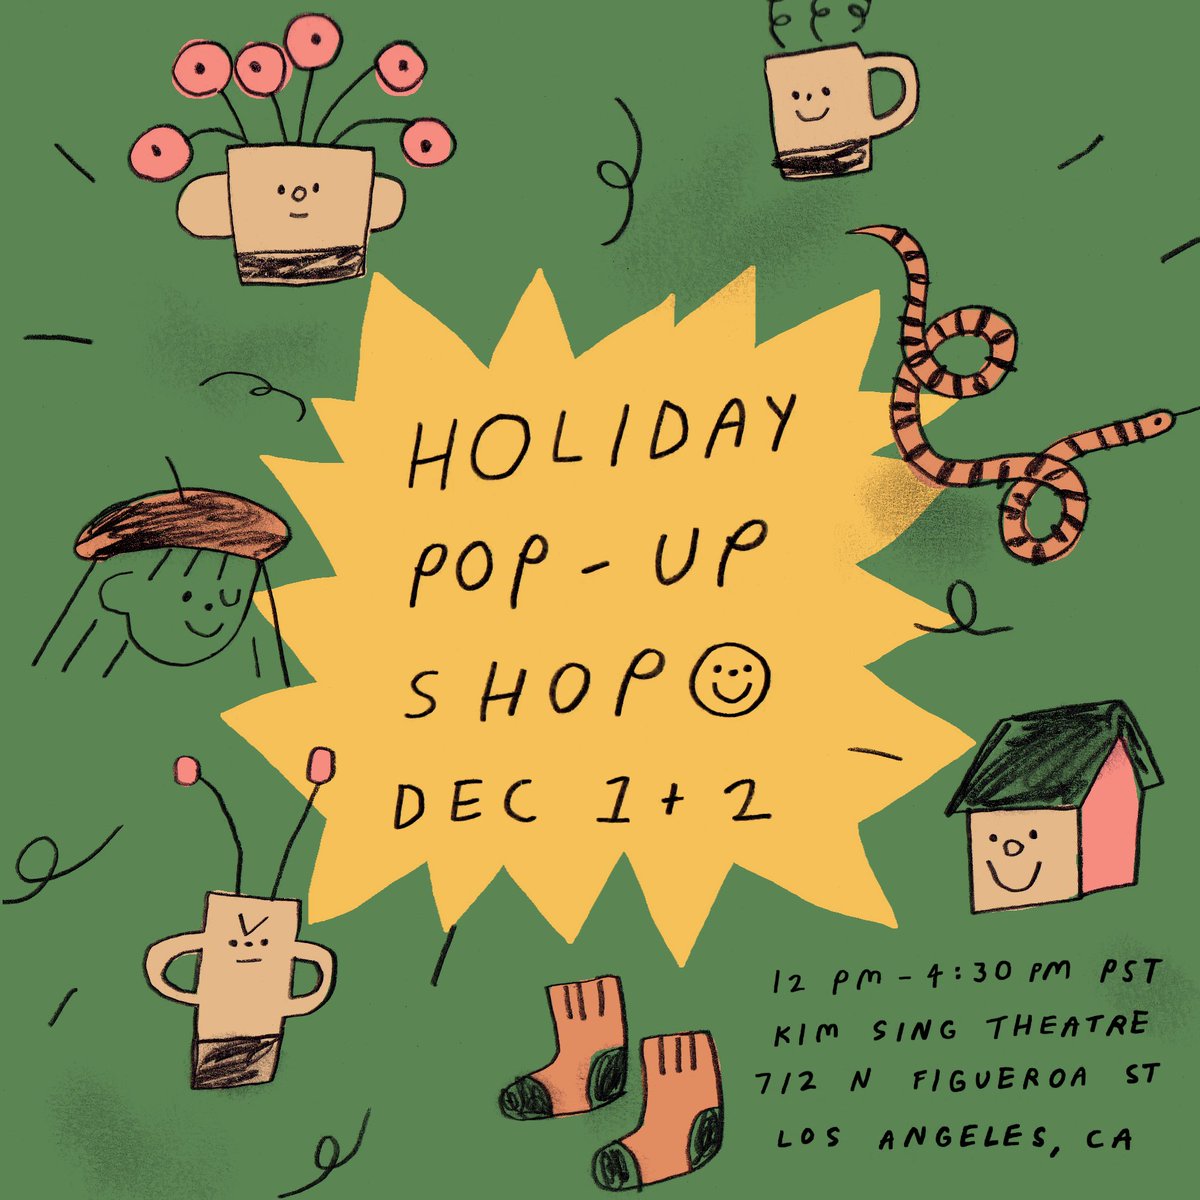 i'm super excited to host my first pop-up shop in los angeles!! i'll have new unreleased apparel and ceramics, so stop by and say hello! ☺️ 